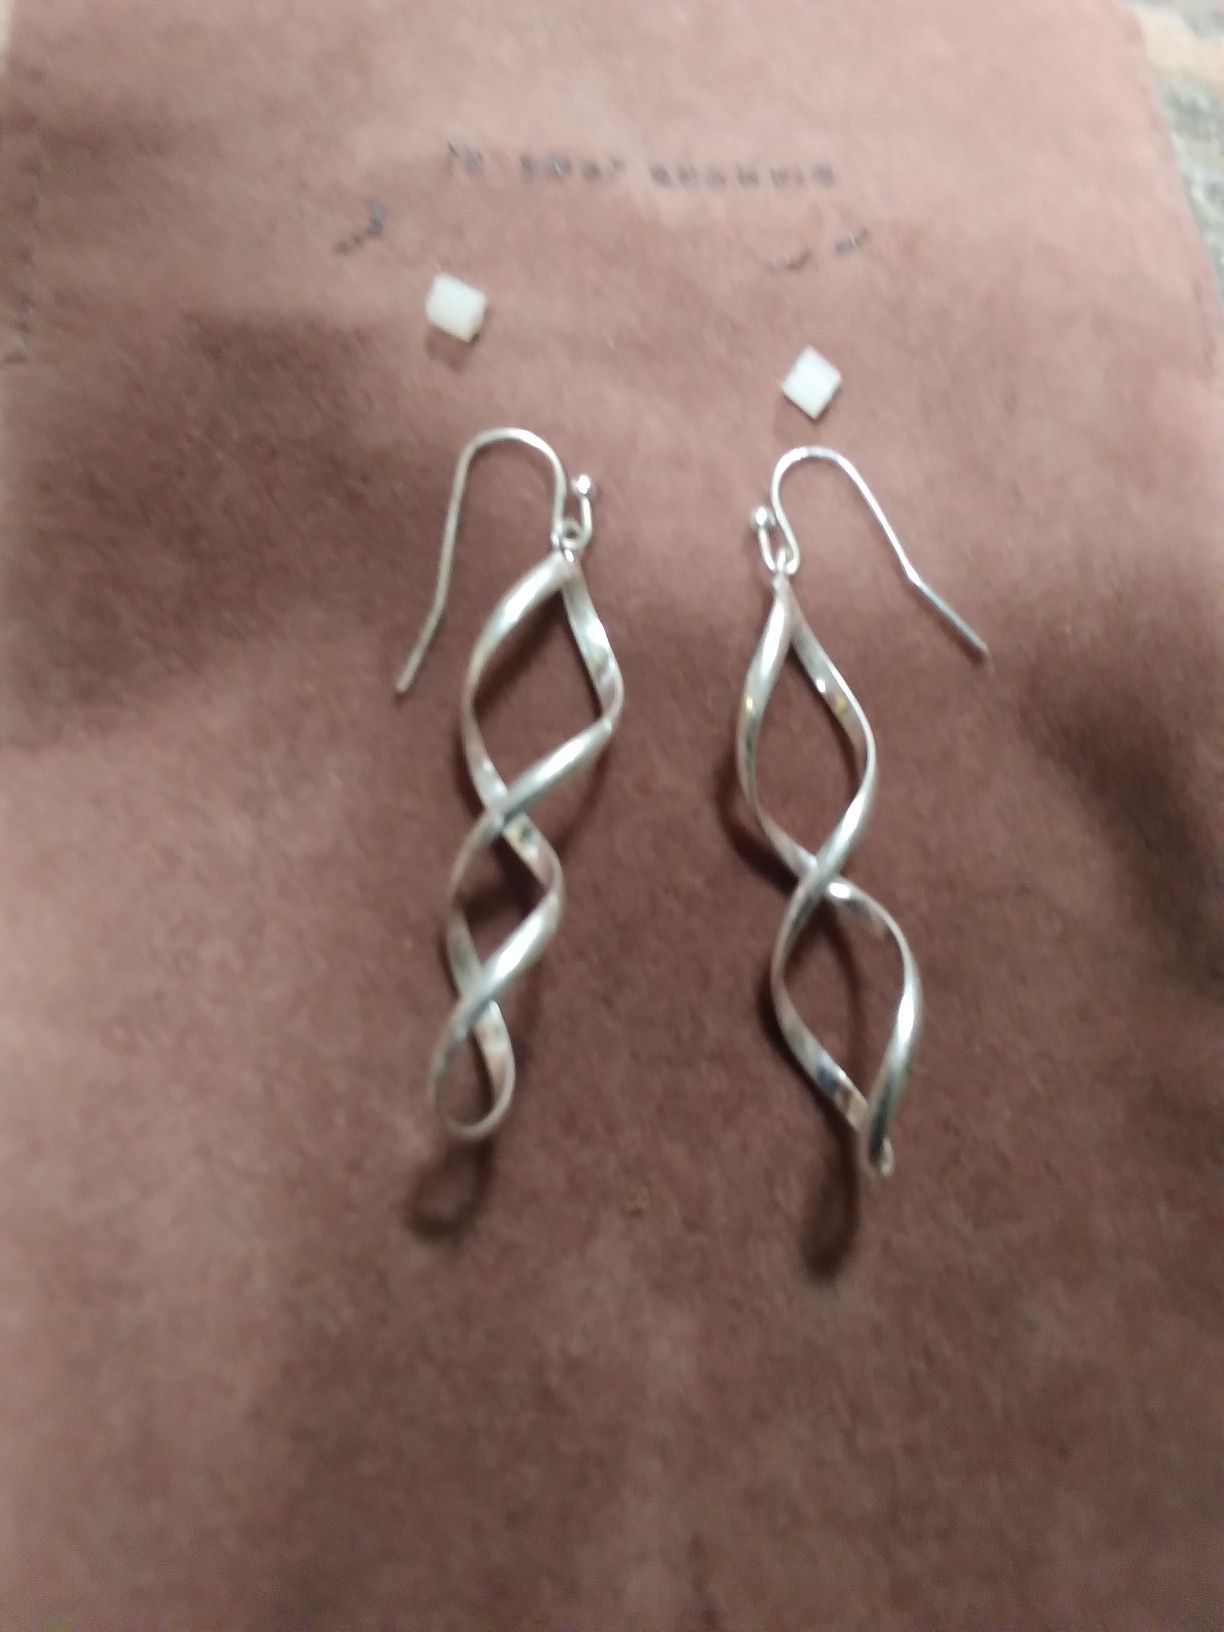 Earrings steling silver new never wore.